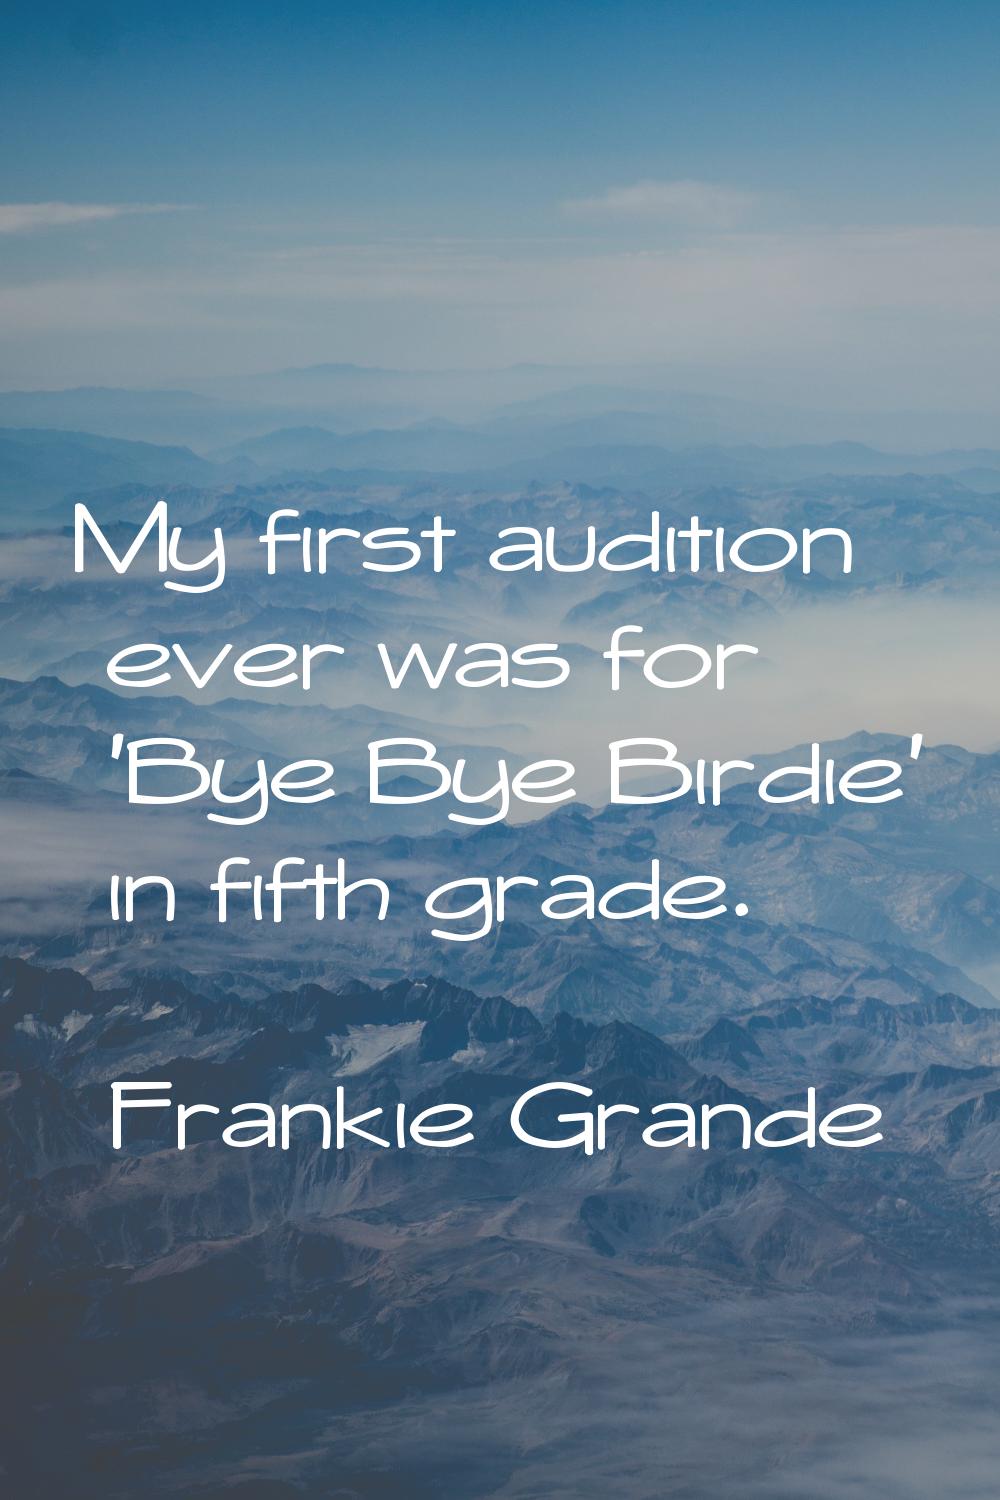 My first audition ever was for 'Bye Bye Birdie' in fifth grade.